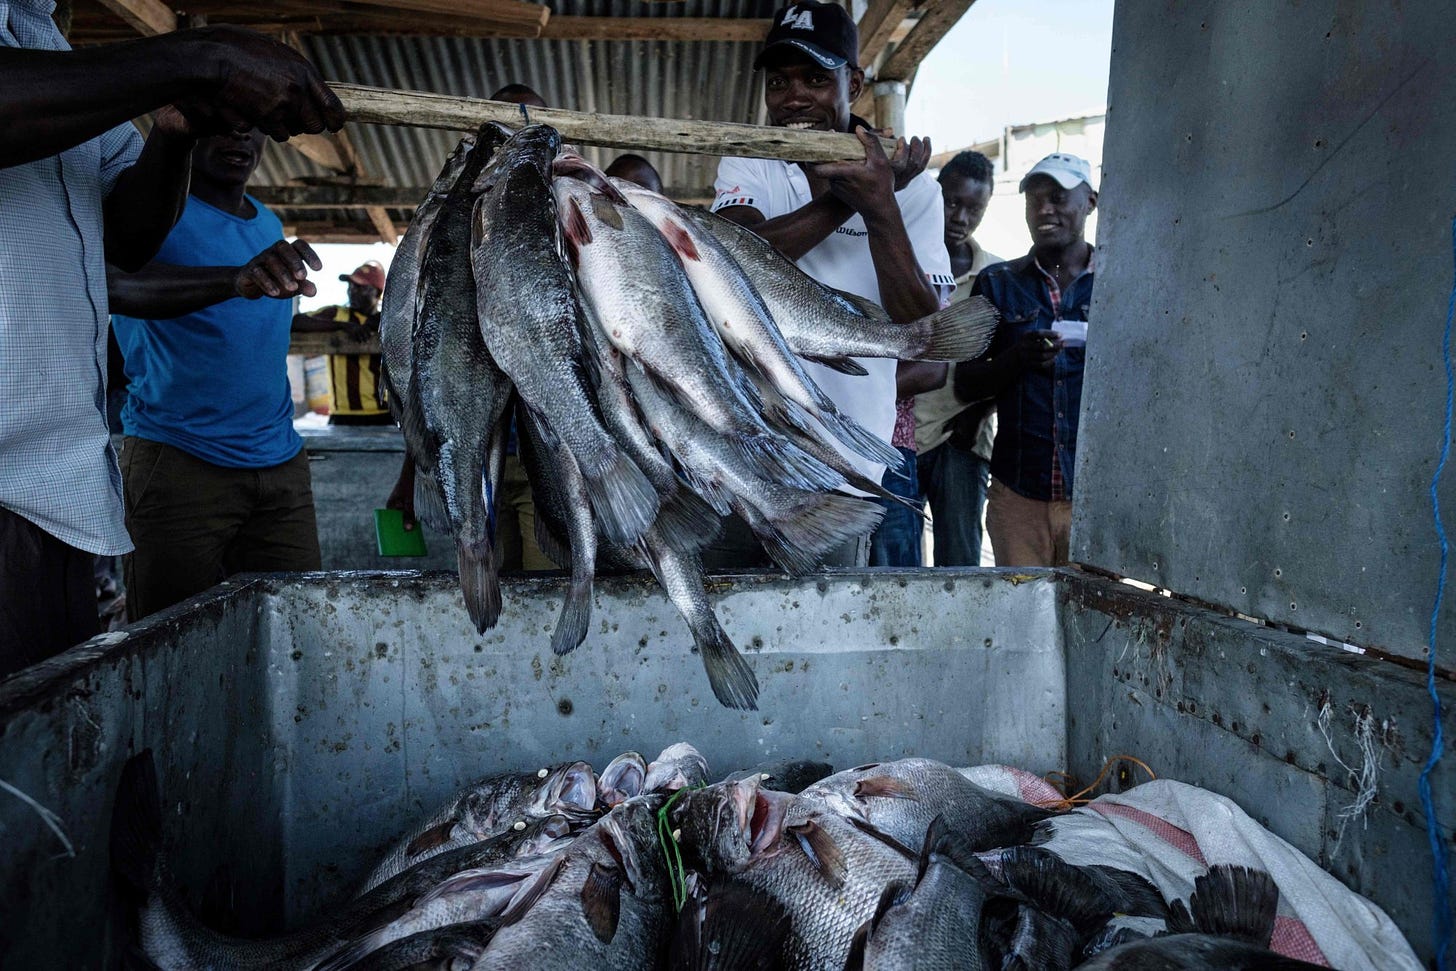 Fishermen throw Nile Perches into a storage box after weighing them on Migingo island on Lake Victoria, Kenya, on October 5, 2018. The fisheries sector in Uganda employs over 5 million people, with Lake Albert and Lake Victoria serving as primary sources. Photo: AFP